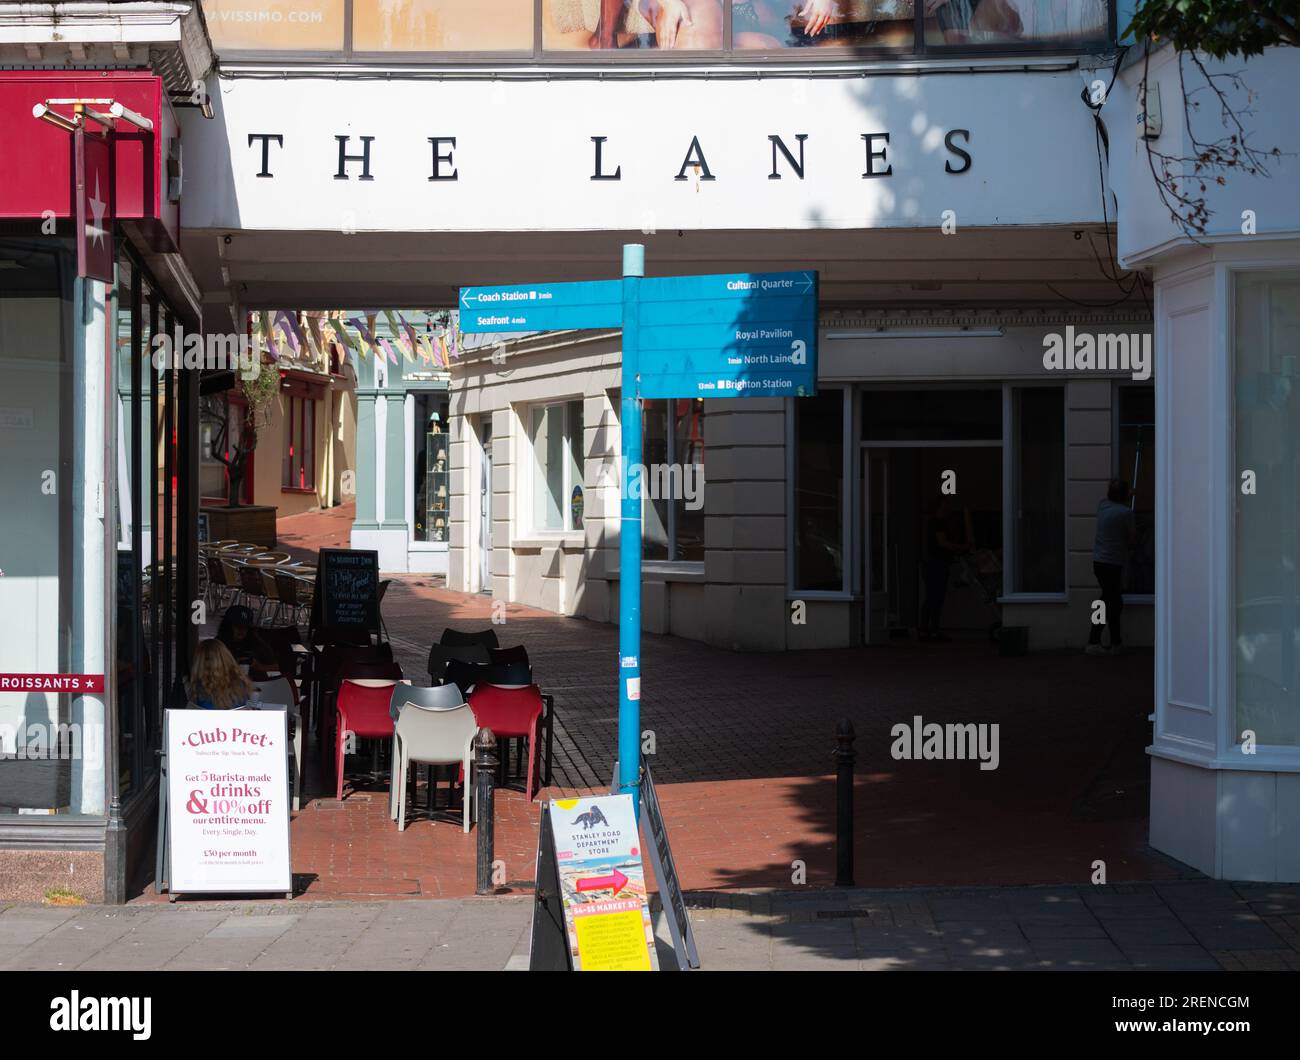 Entrance to The Lanes, once a fishing town called Brighthelmstone, now with upmarket restaurants and shops in Brighton, Brighton & Hove, England, UK. Stock Photo